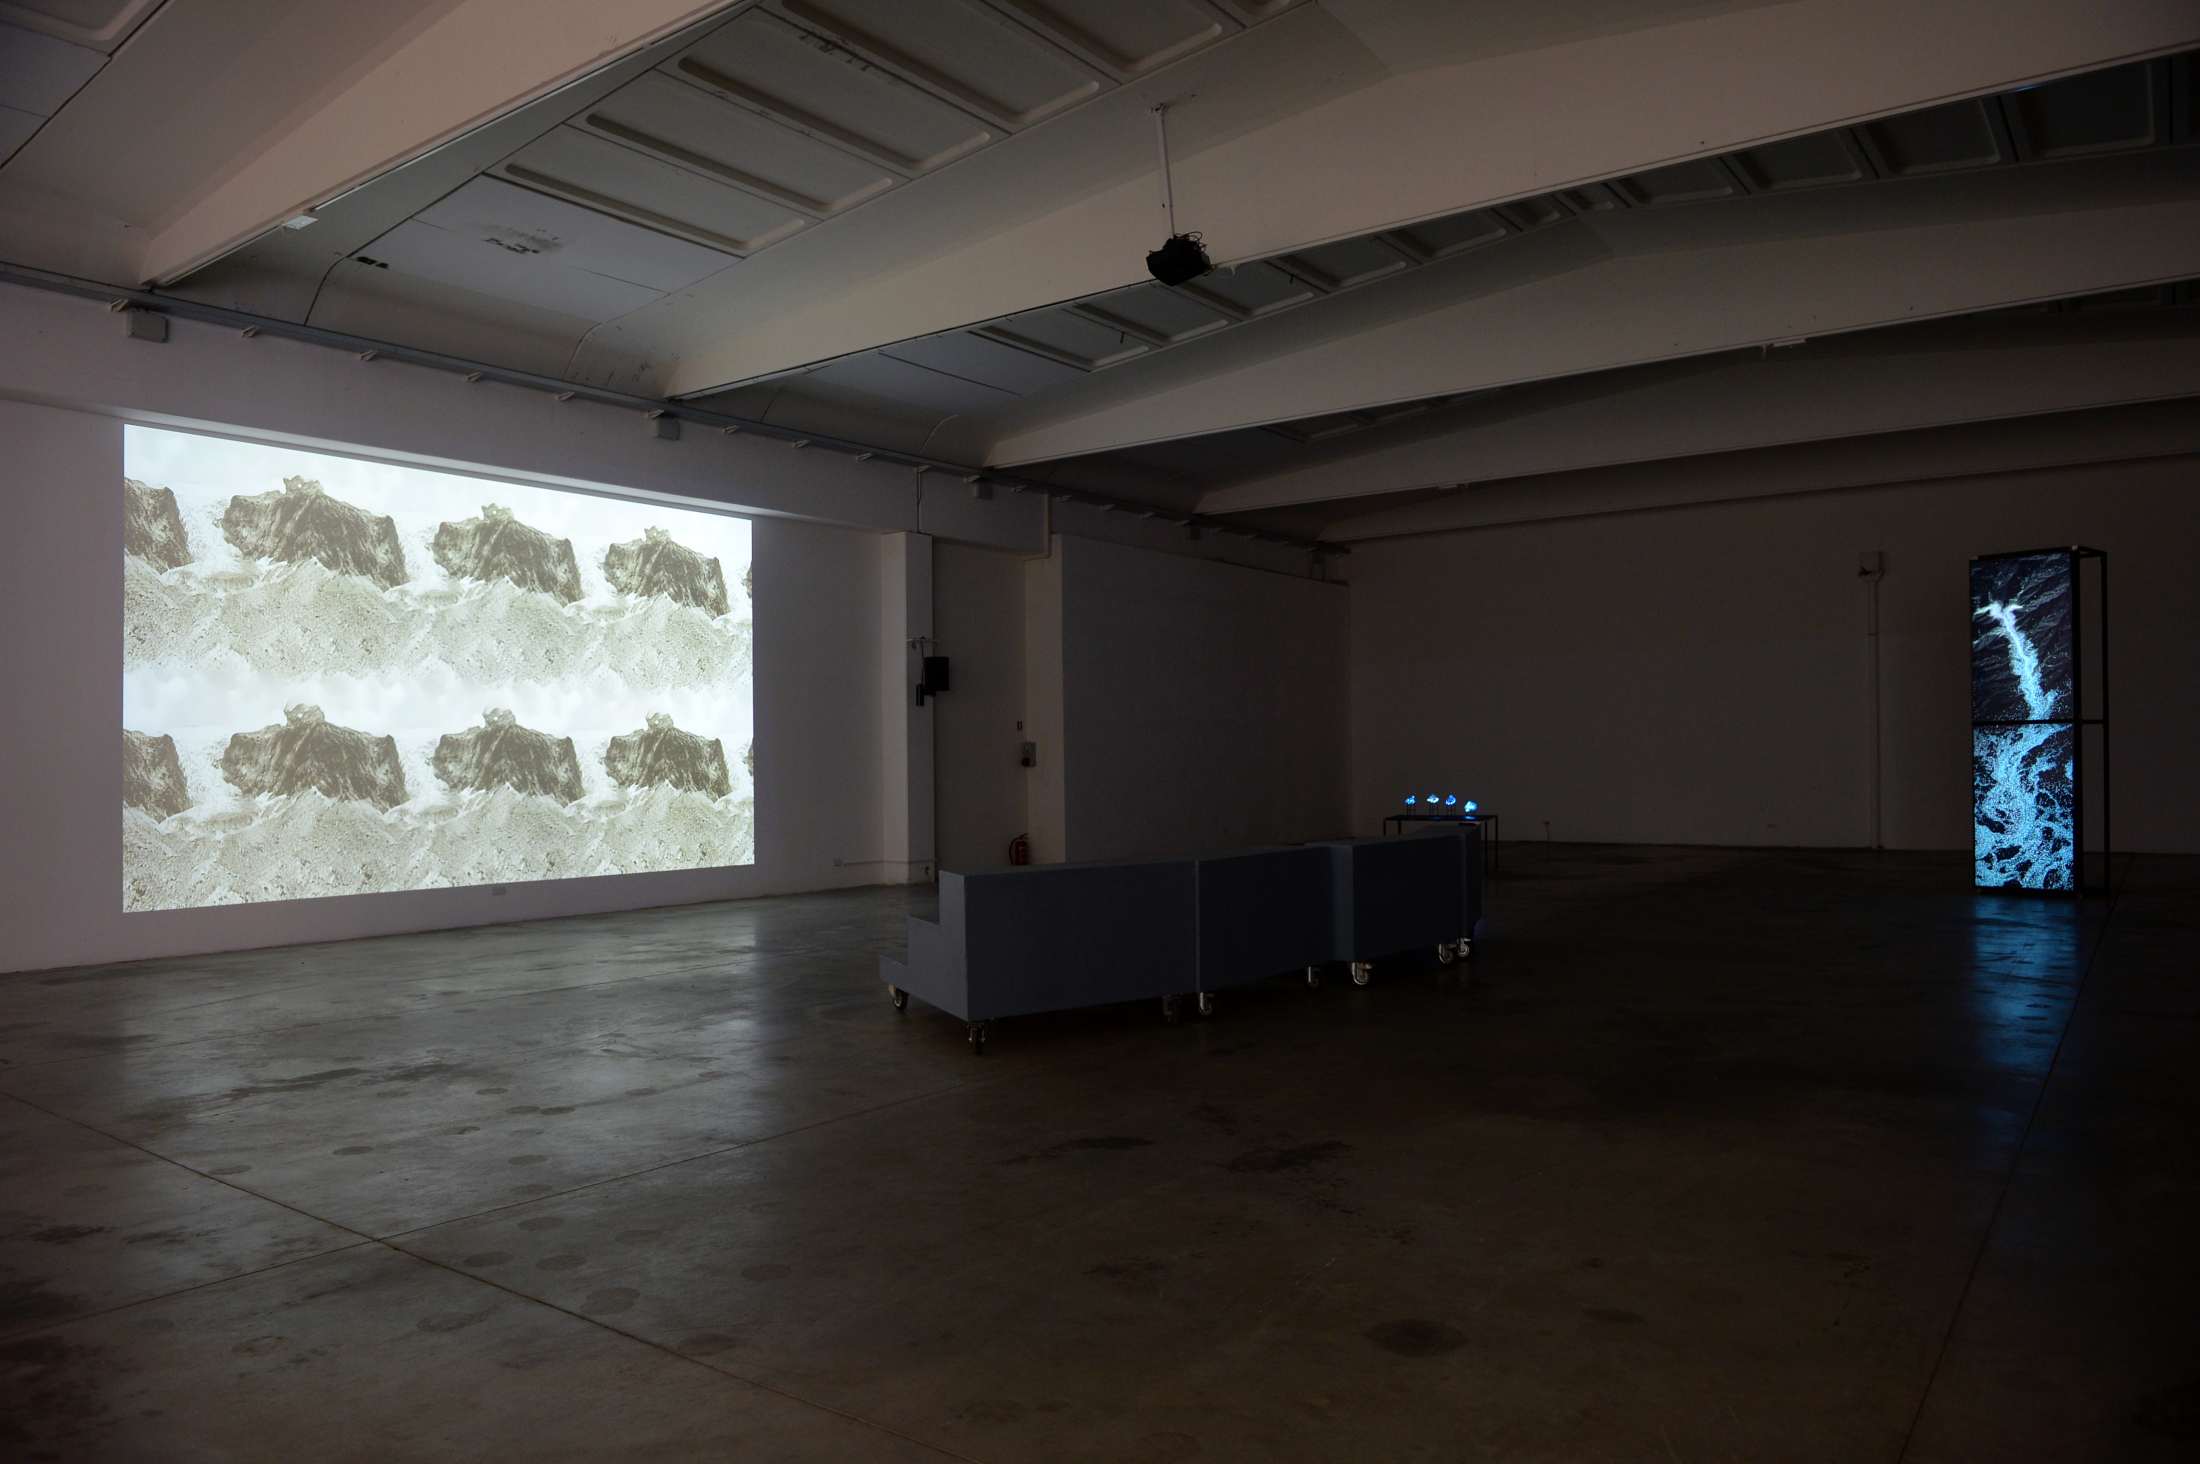 exhibition with video projection, glas sculptures and ai-generated videos on screen